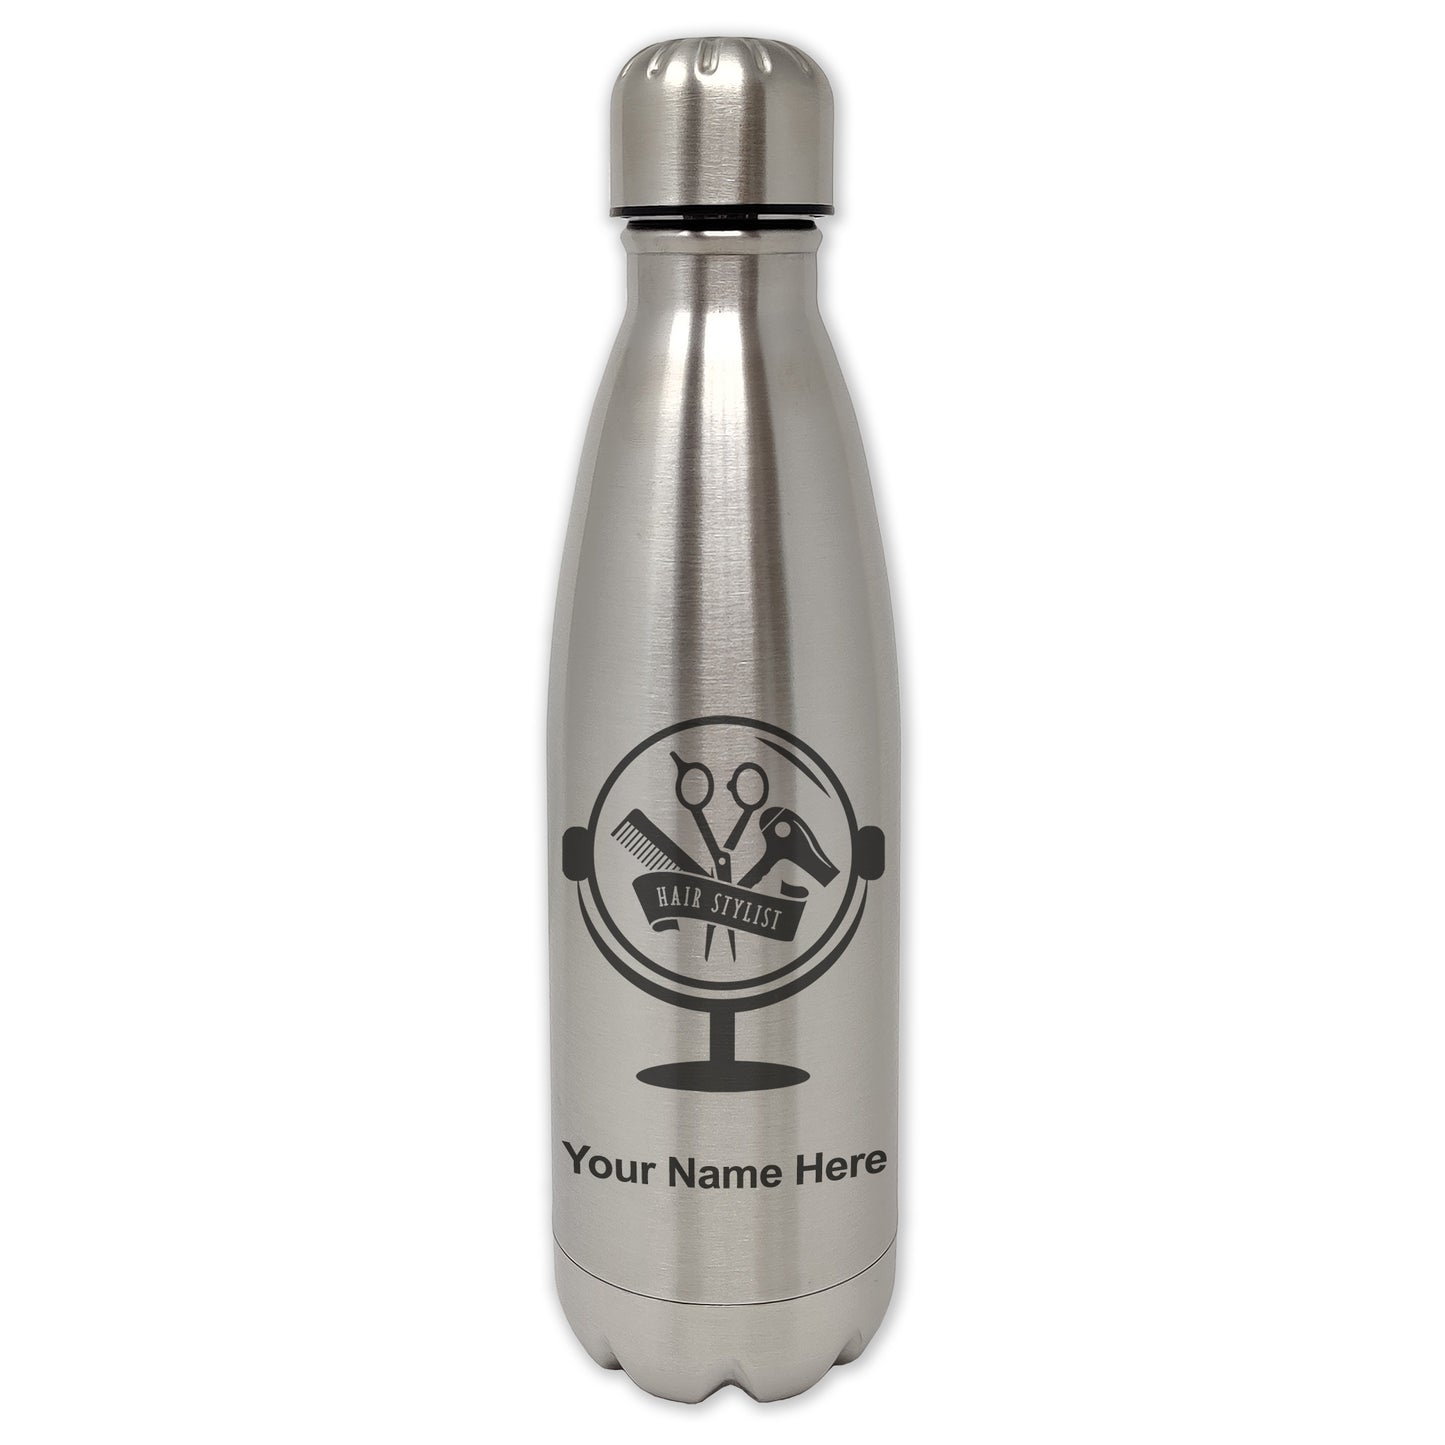 LaserGram Single Wall Water Bottle, Hair Stylist, Personalized Engraving Included